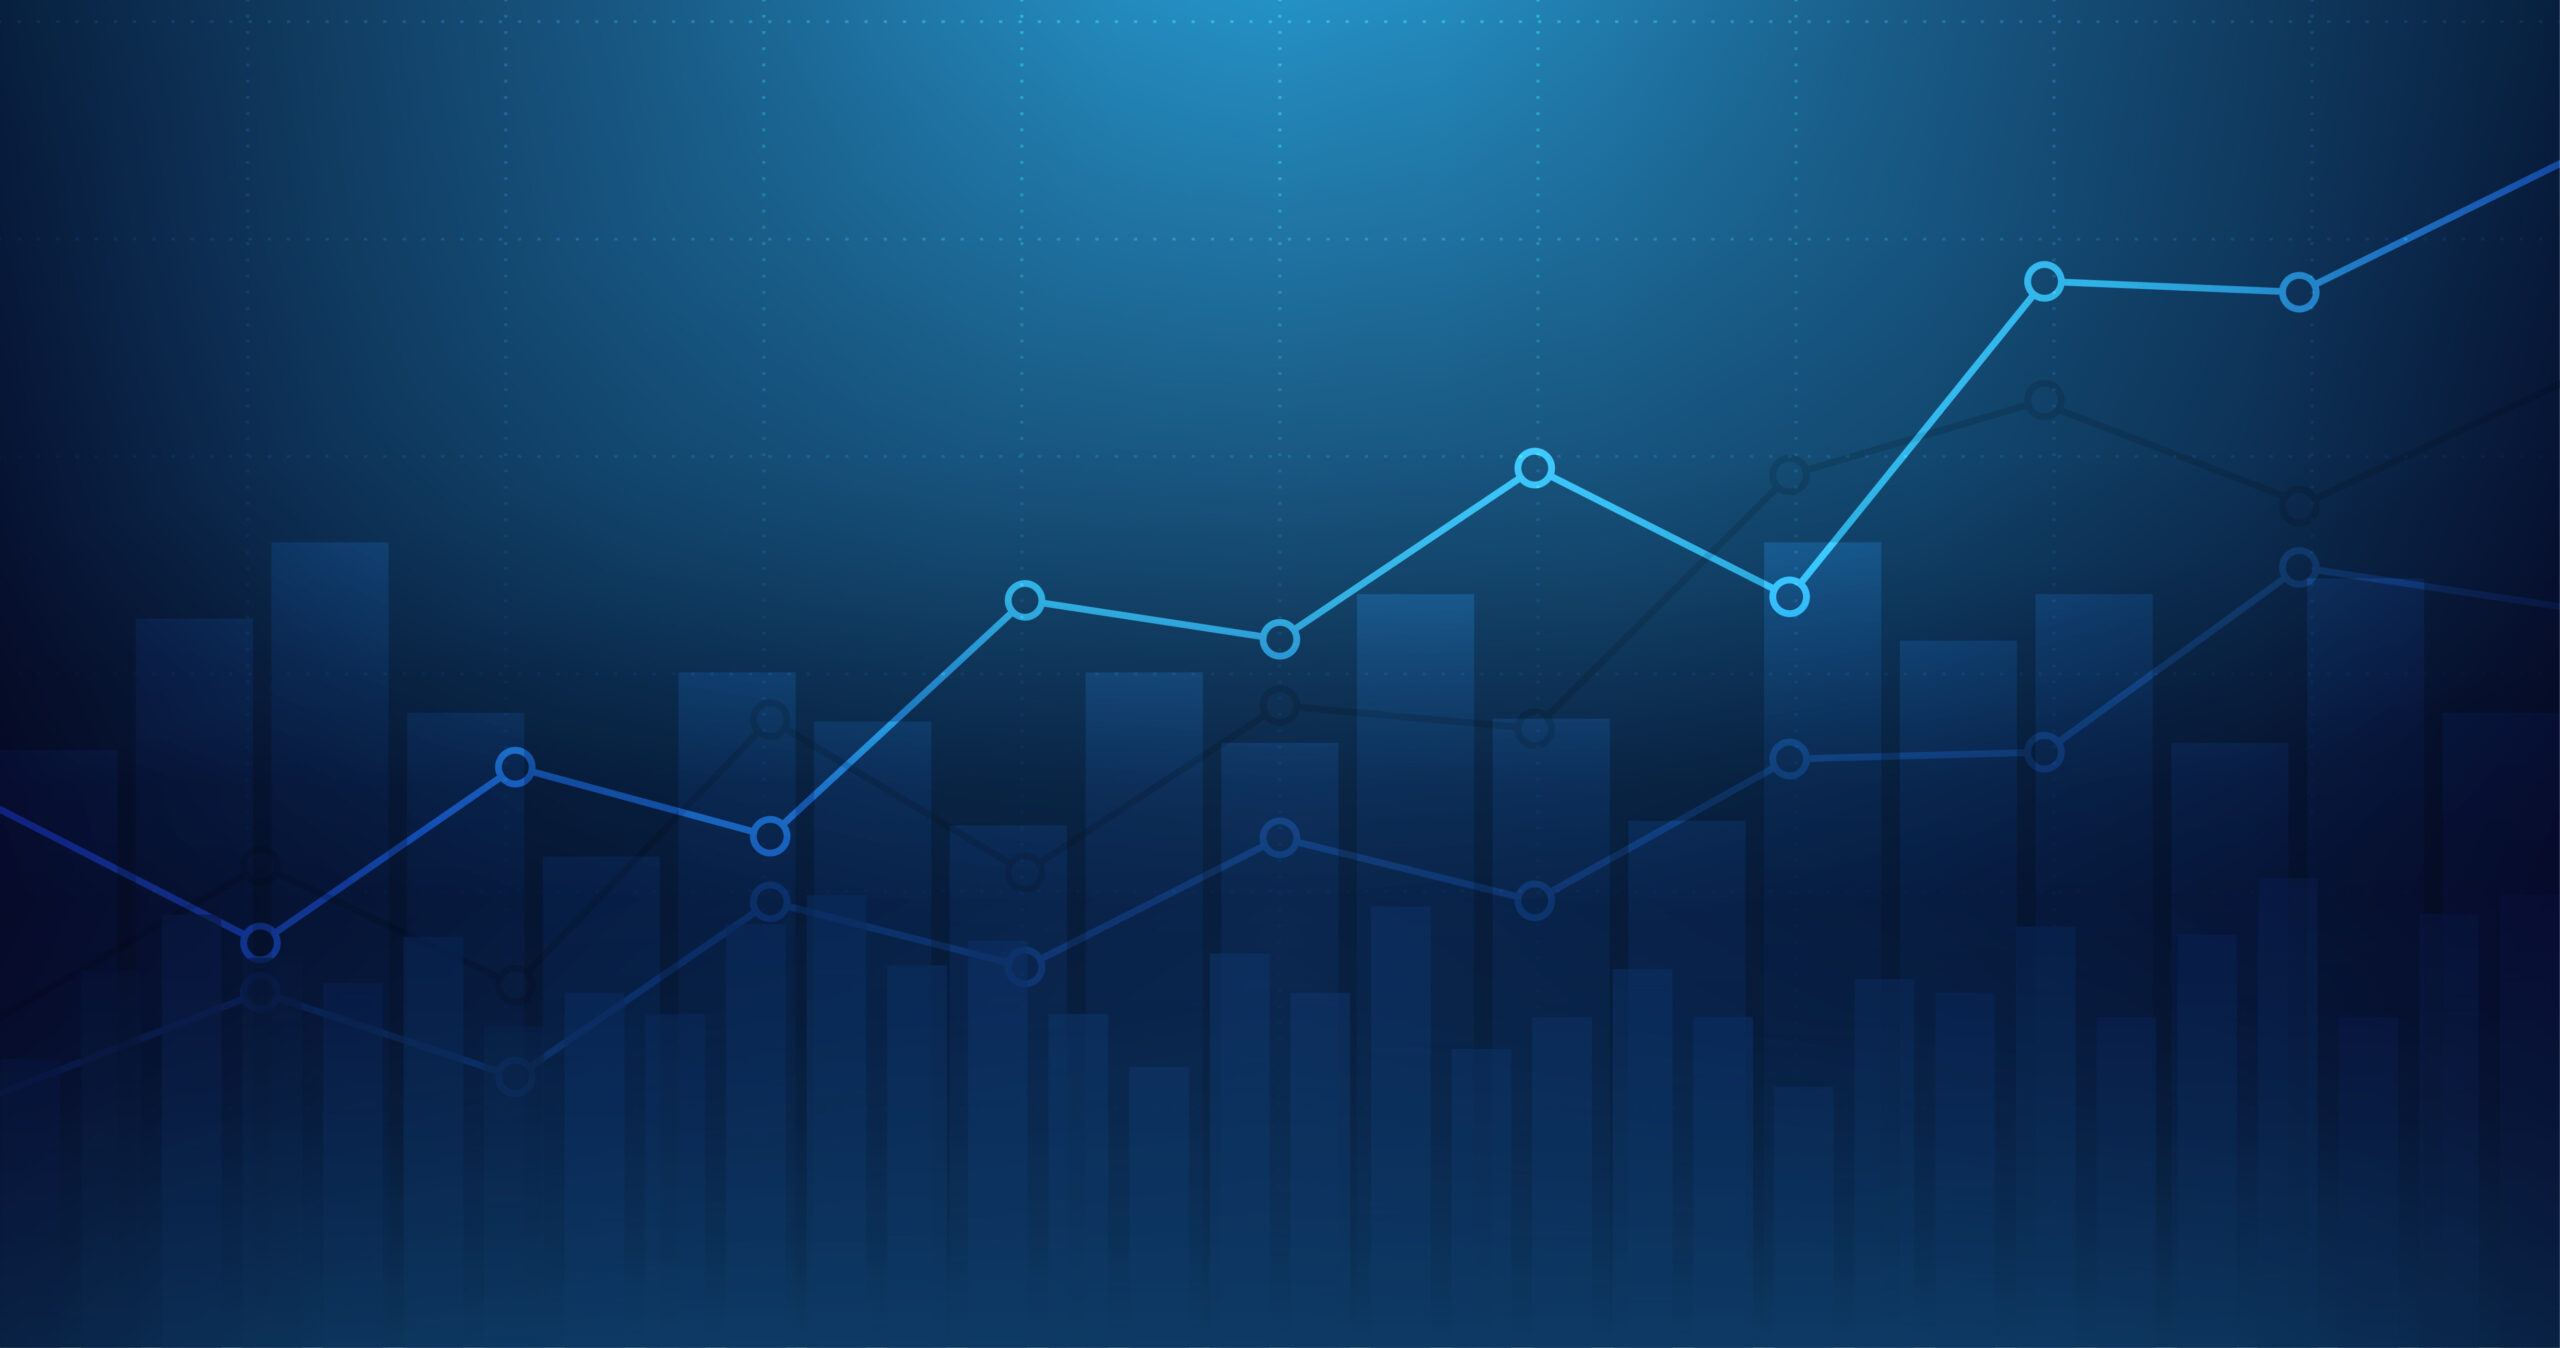 Digital bar graphs and line graphs are layered atop one another in front of a dark blue background.